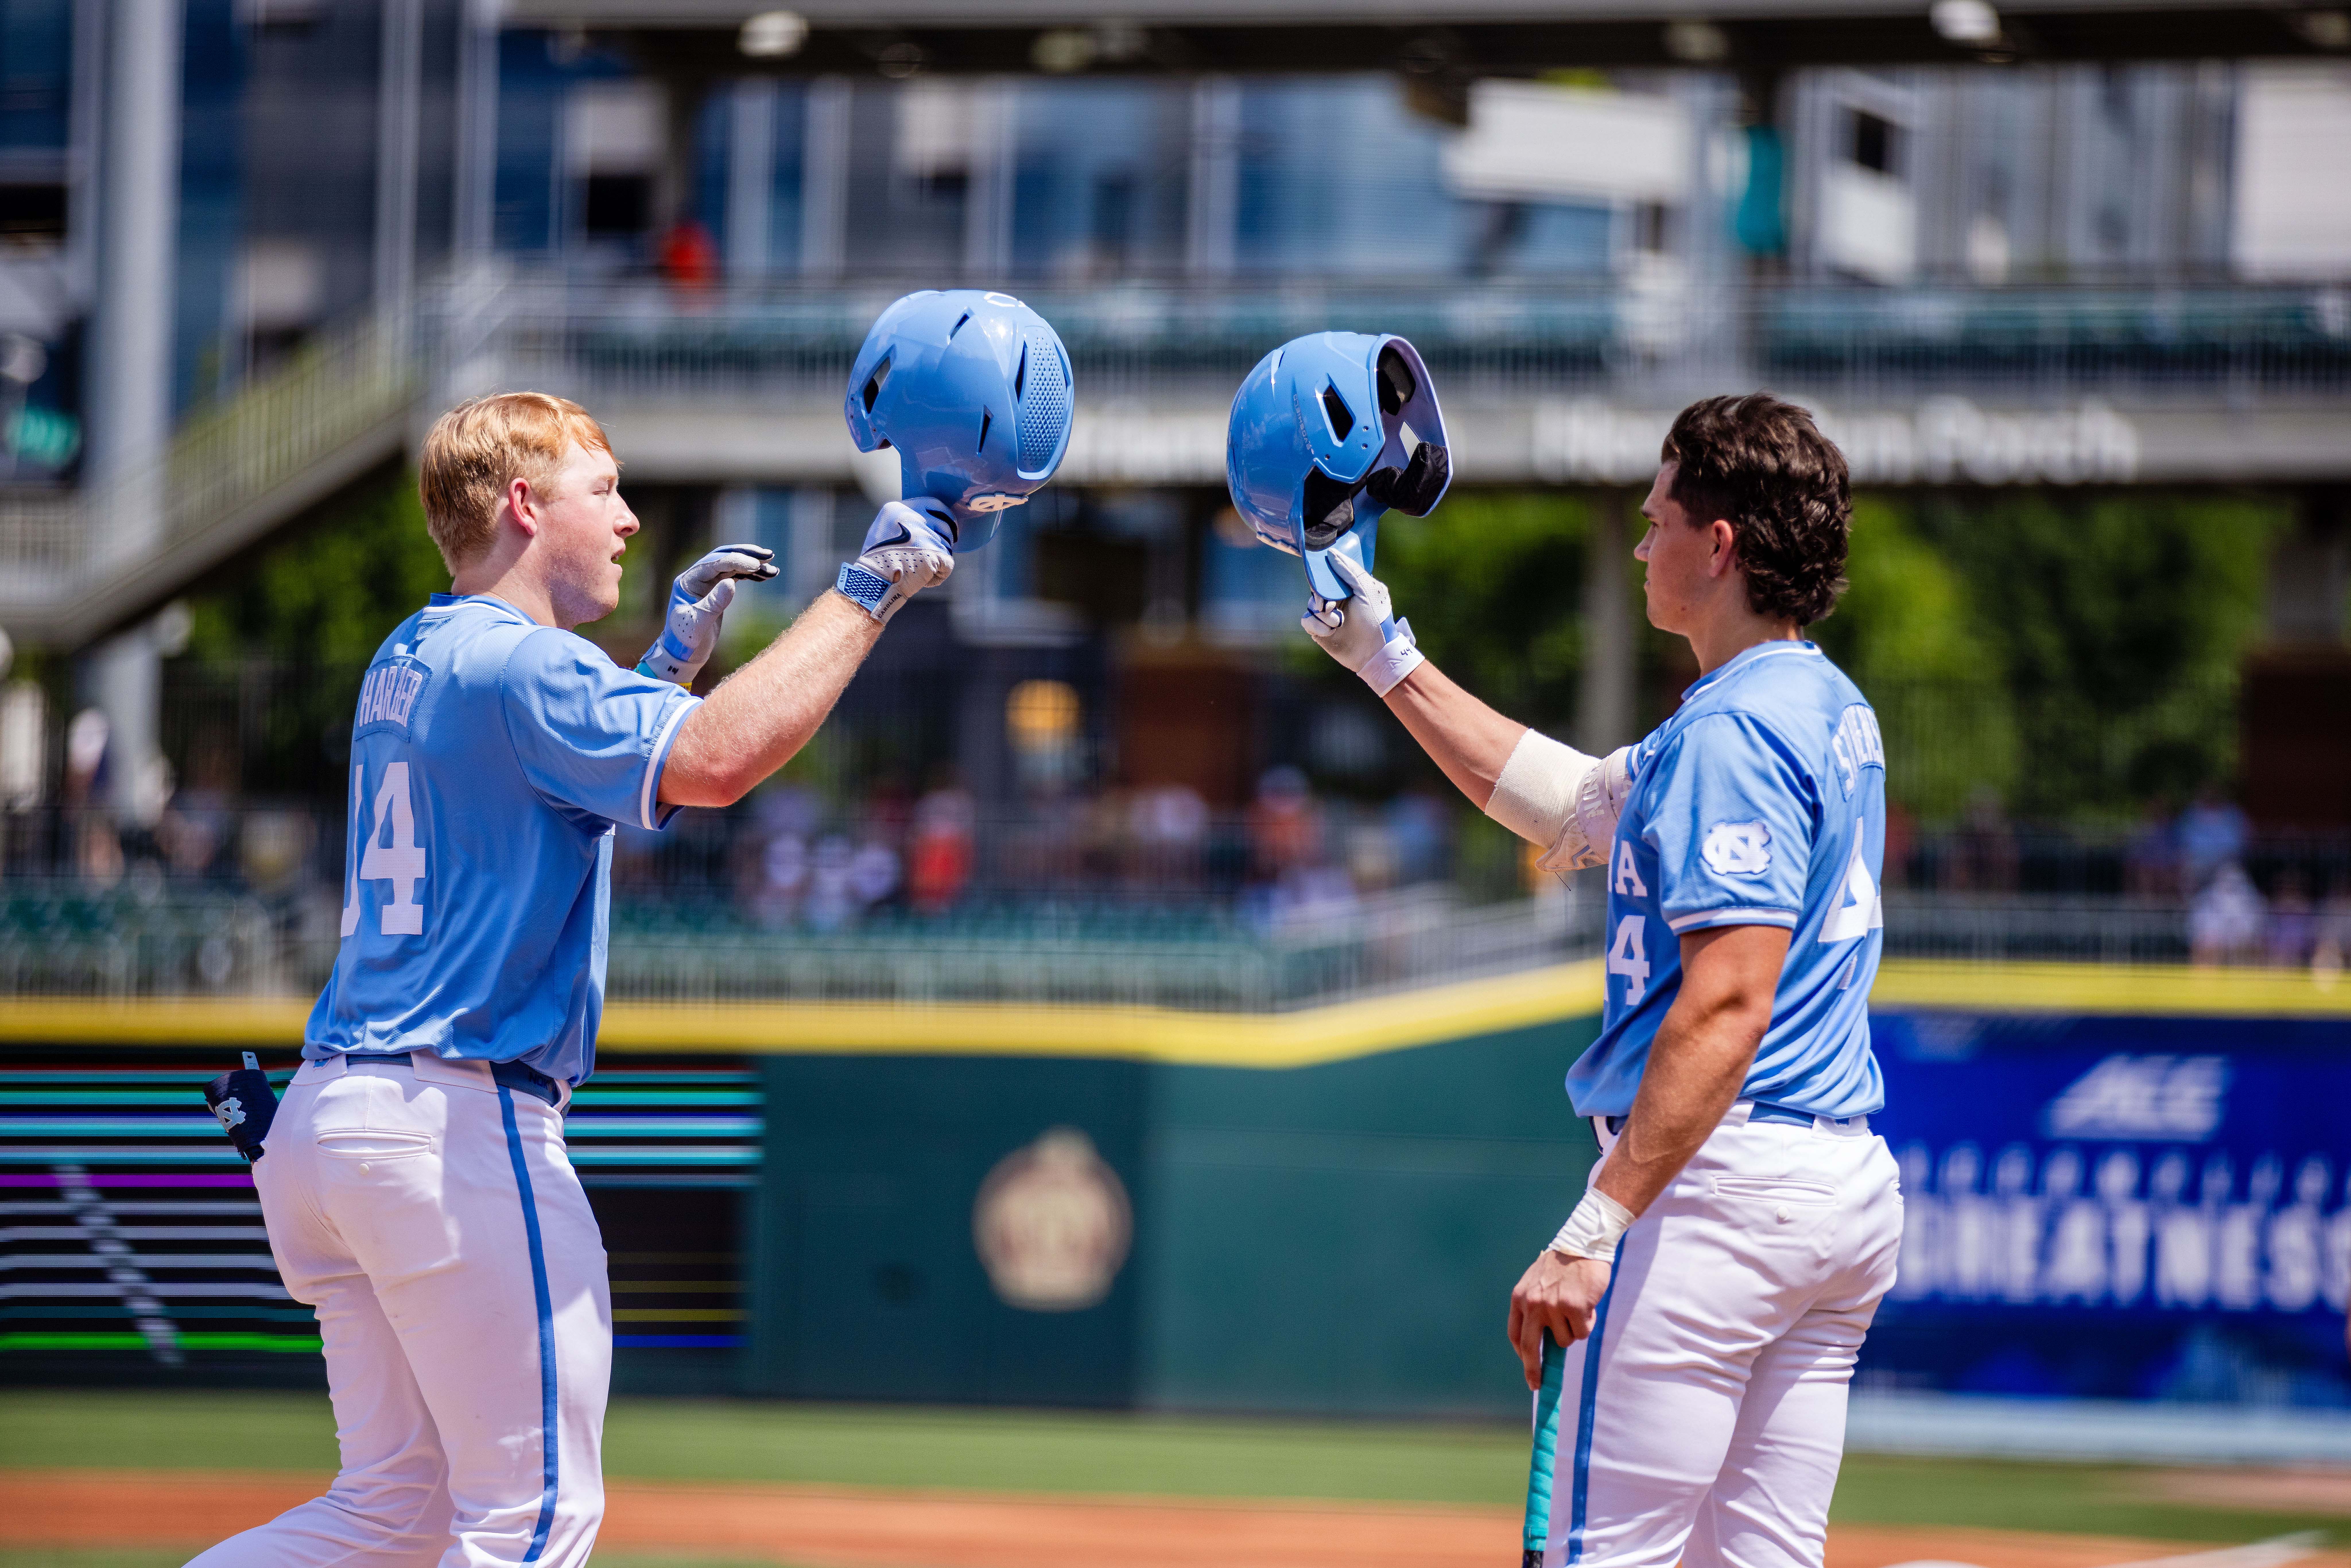 The No. 2 seed in the Chapel Hill Regional is still up for grabs?